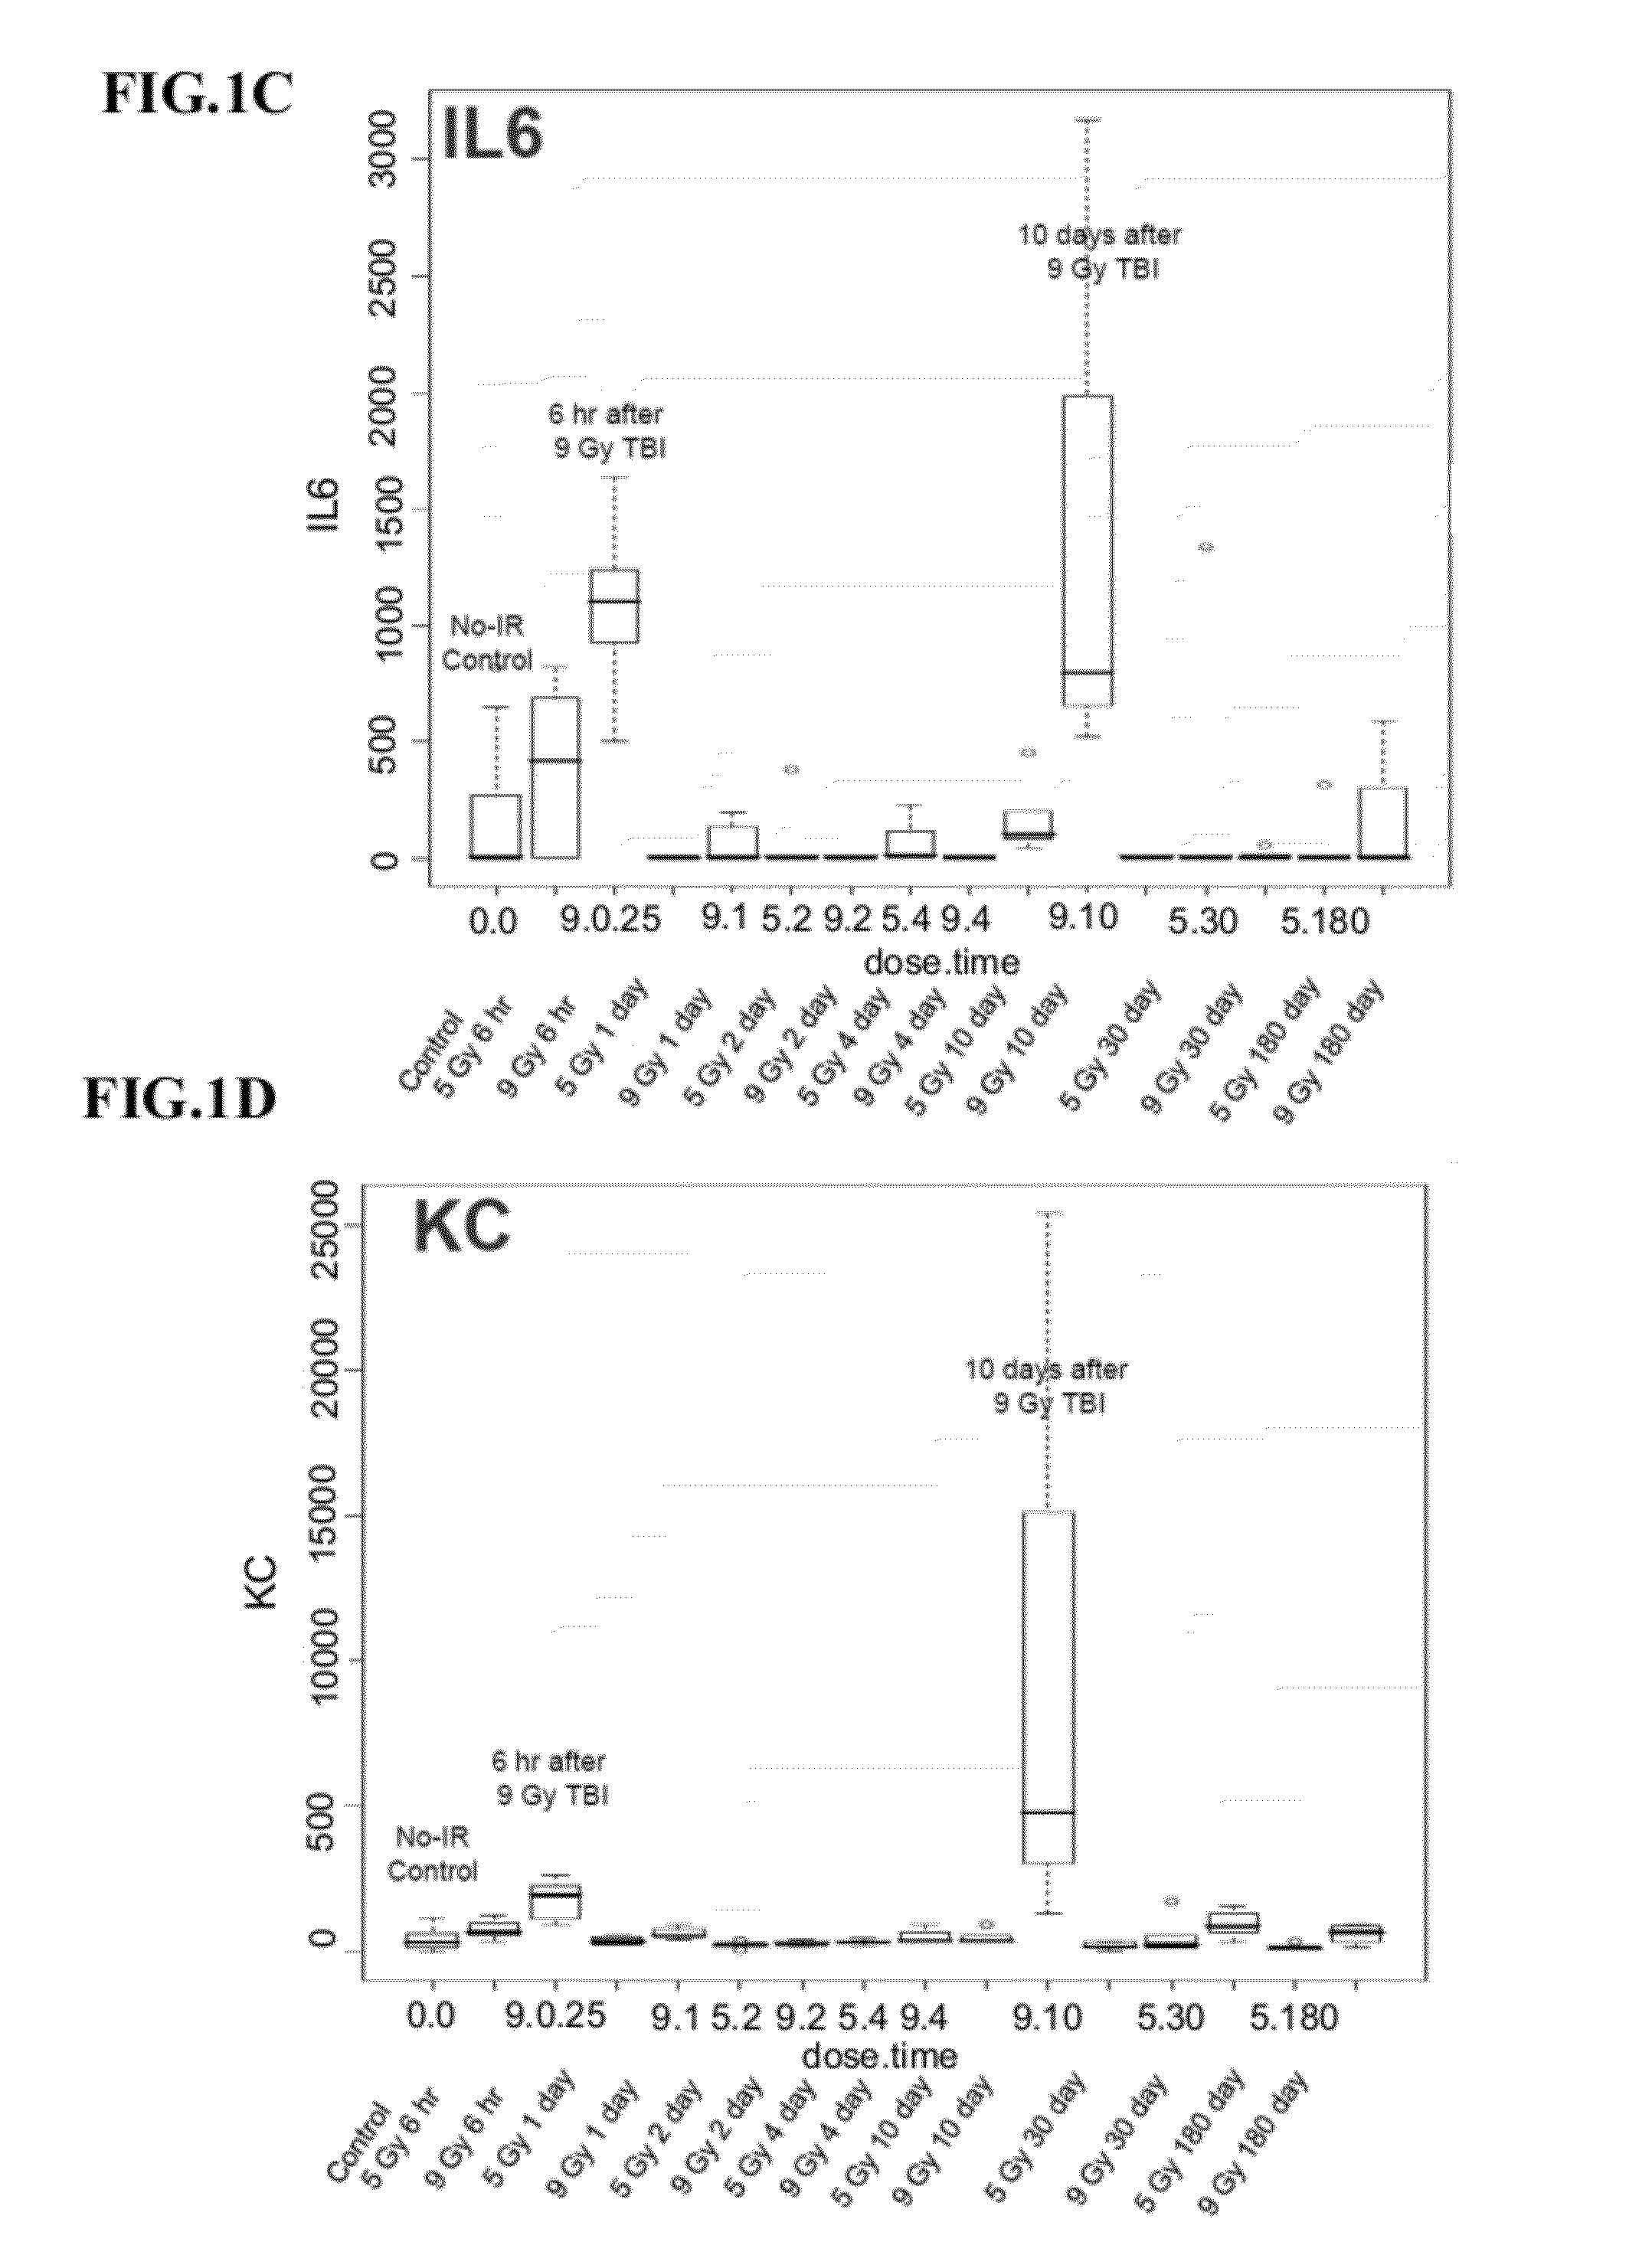 Use of glycyrrhetinic acid, glycyrrhizic acid and related compounds for prevention and/or treatment of pulmonary fibrosis